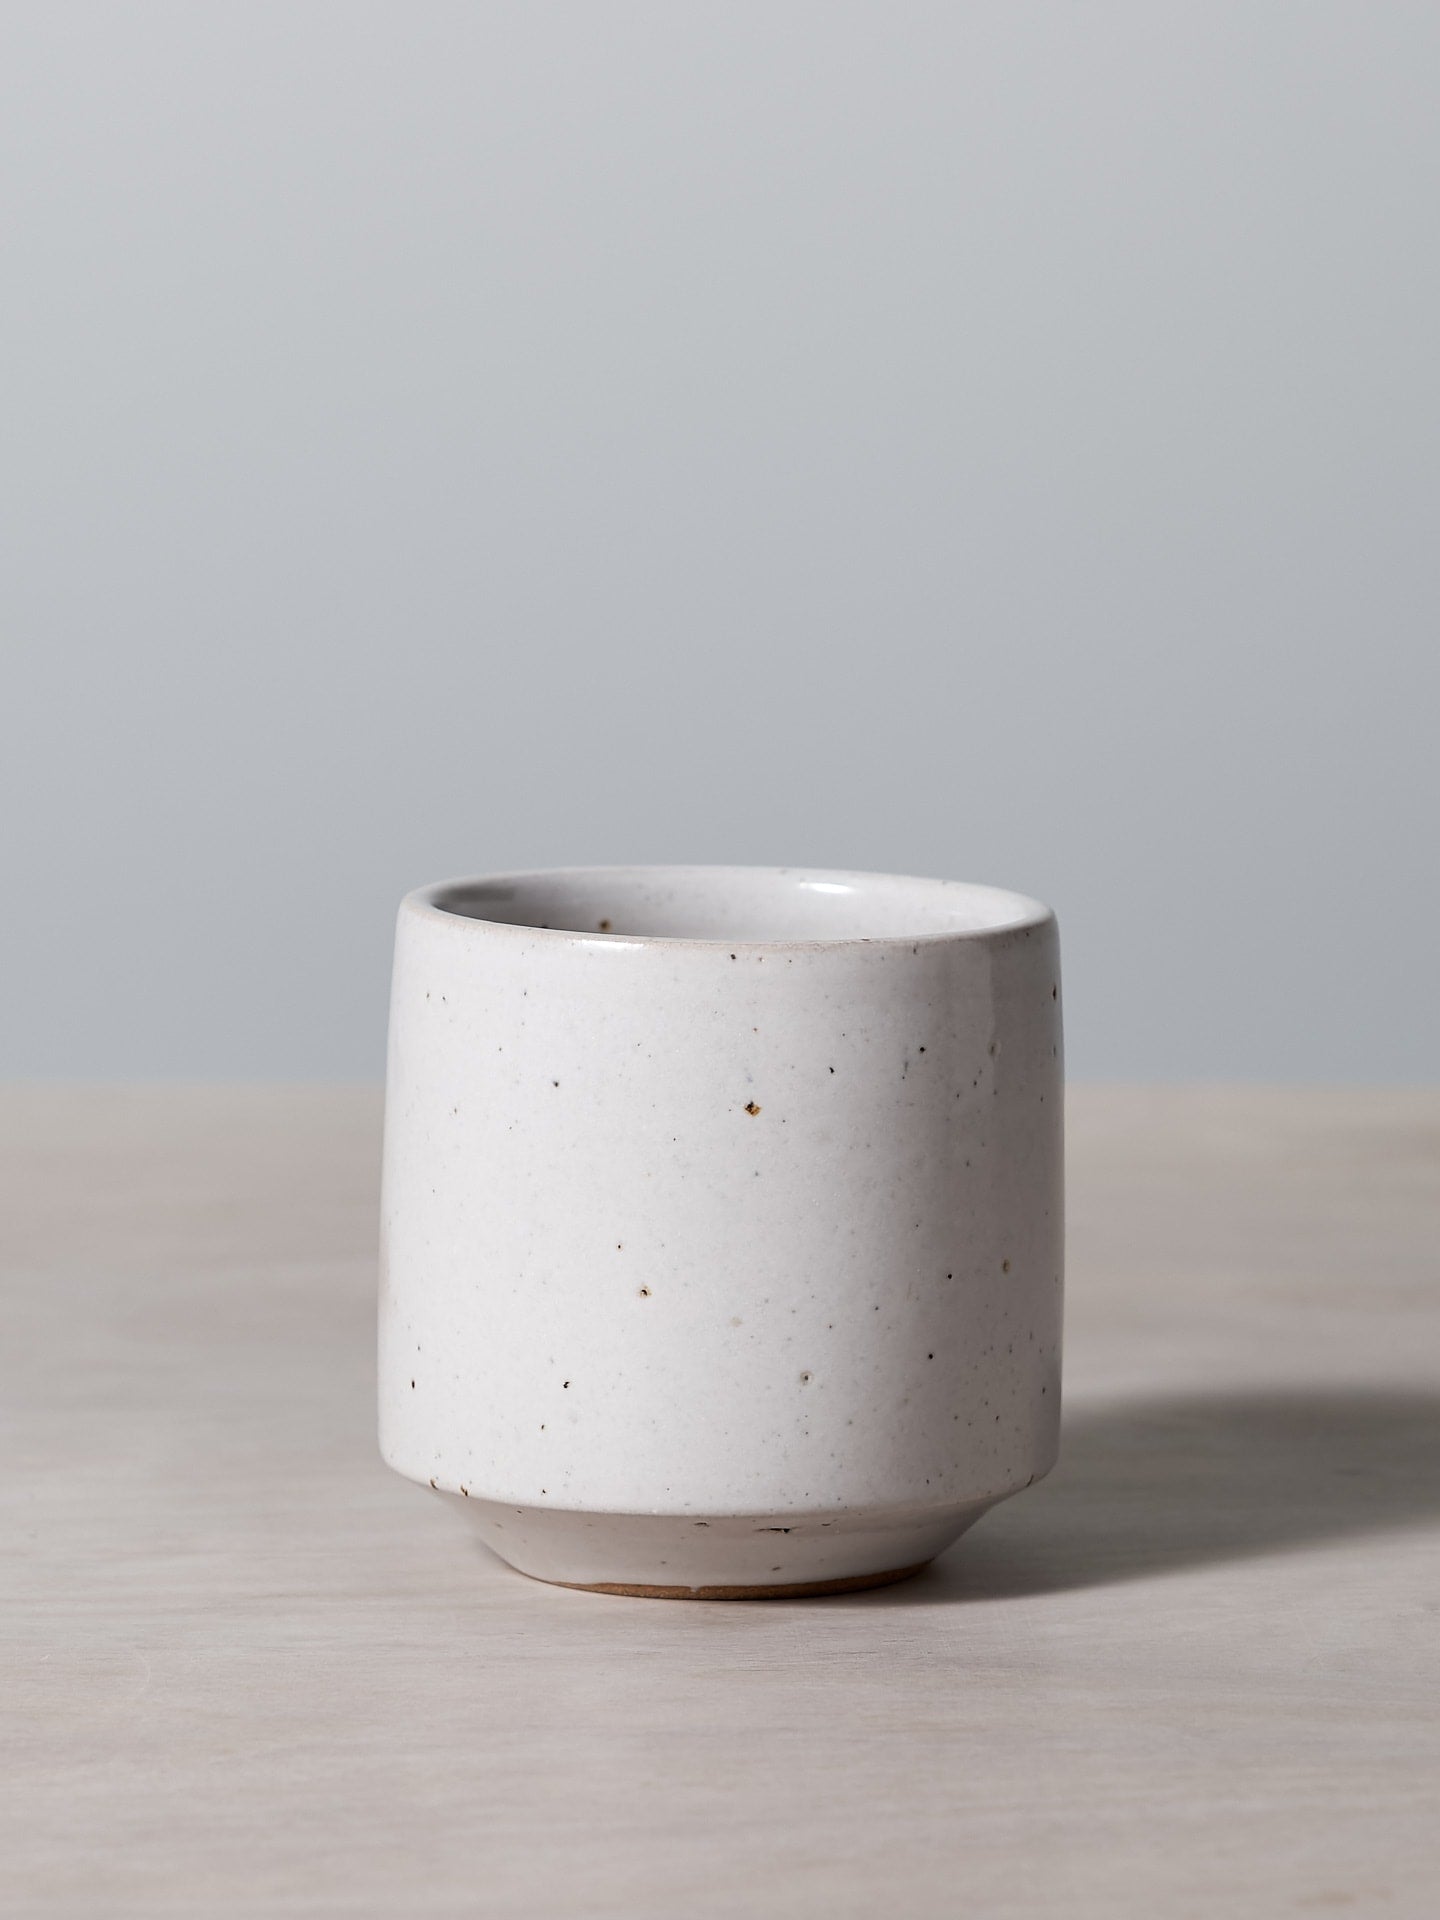 A Richard Beauchamp Stacking Tumbler sitting on a wooden table.